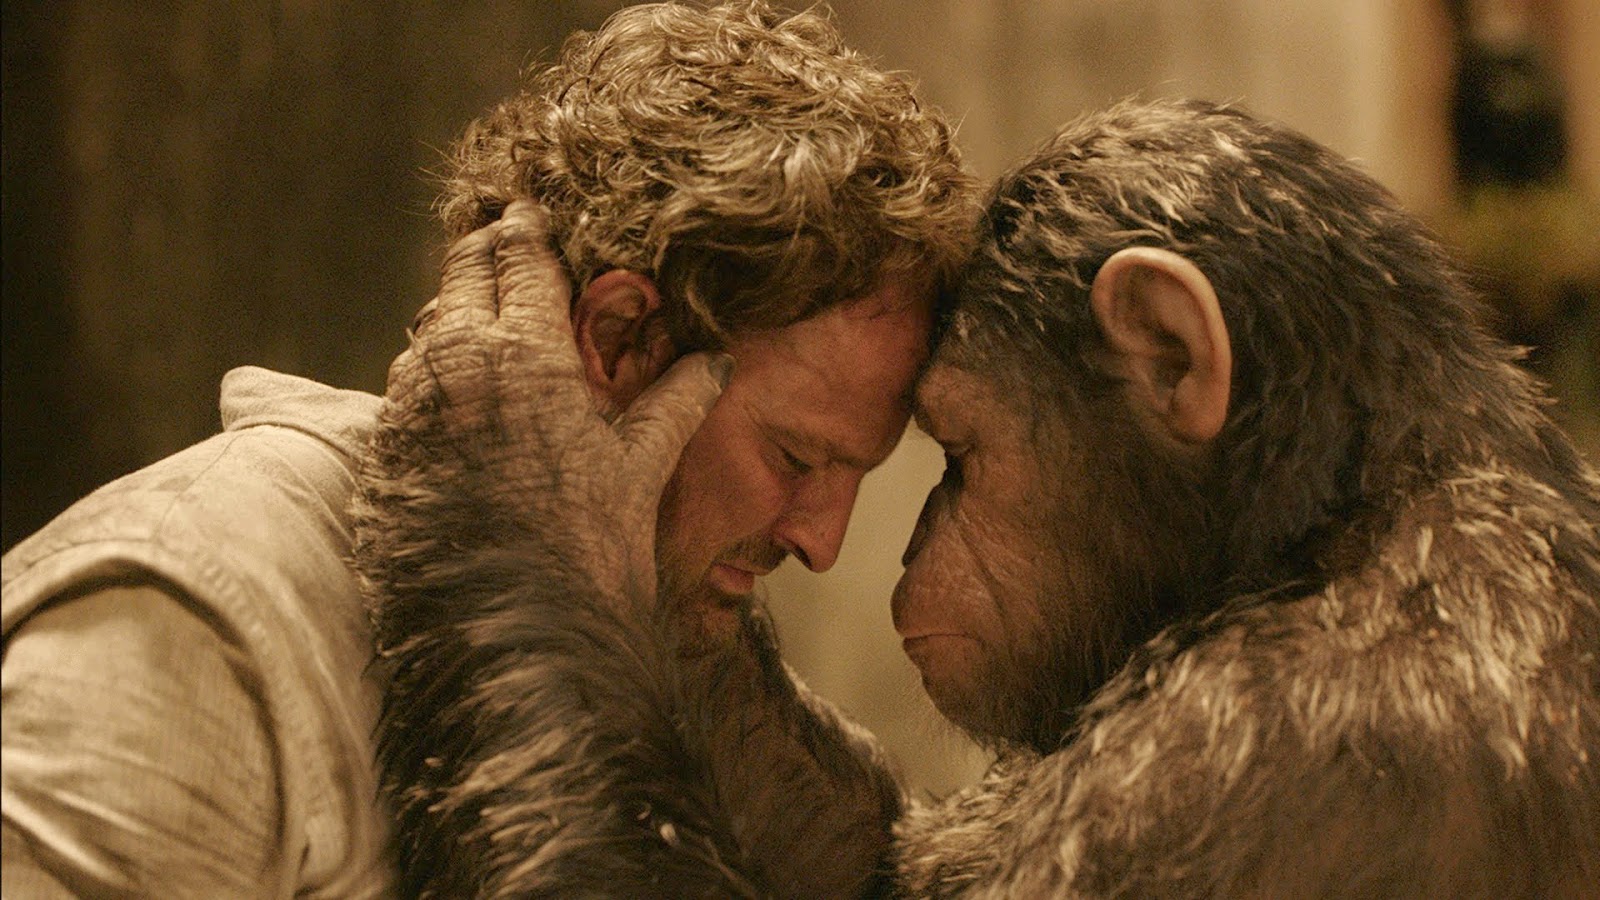 Dawn of the Planet of the Apes Movie 2014 Free Download